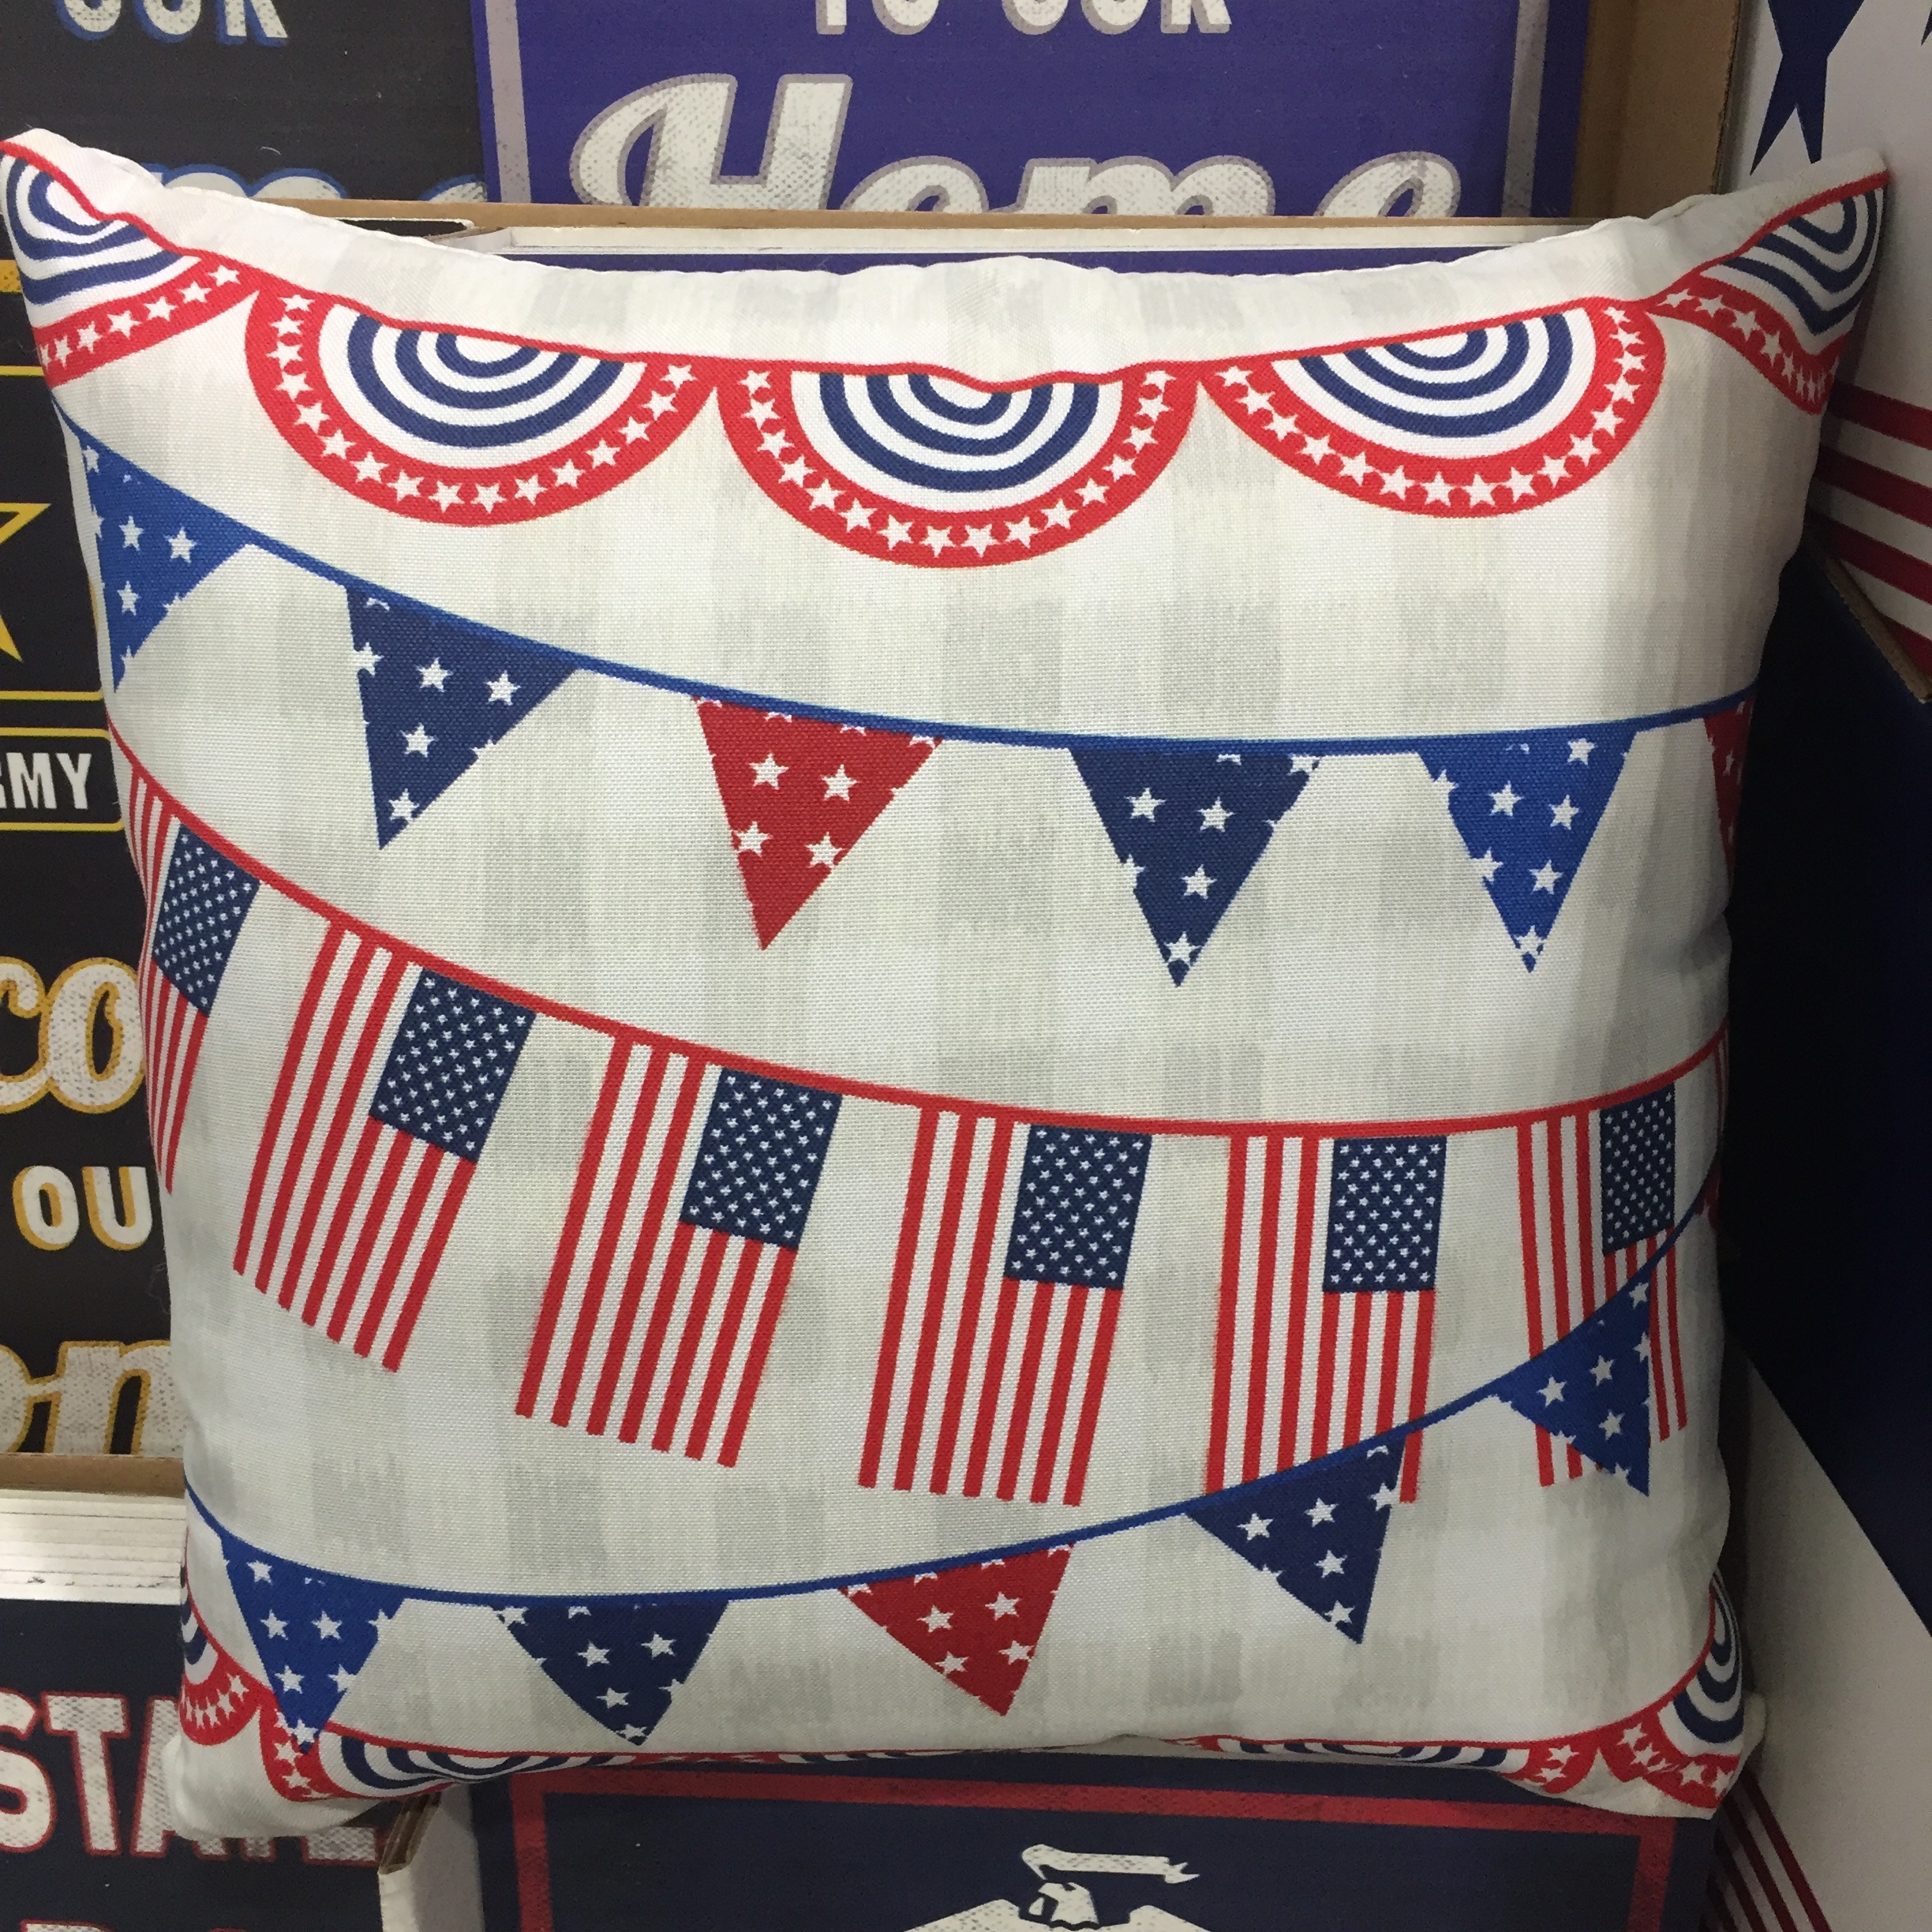 Festive pillow covered in American flags and red white and blue bunting for Fourth of July